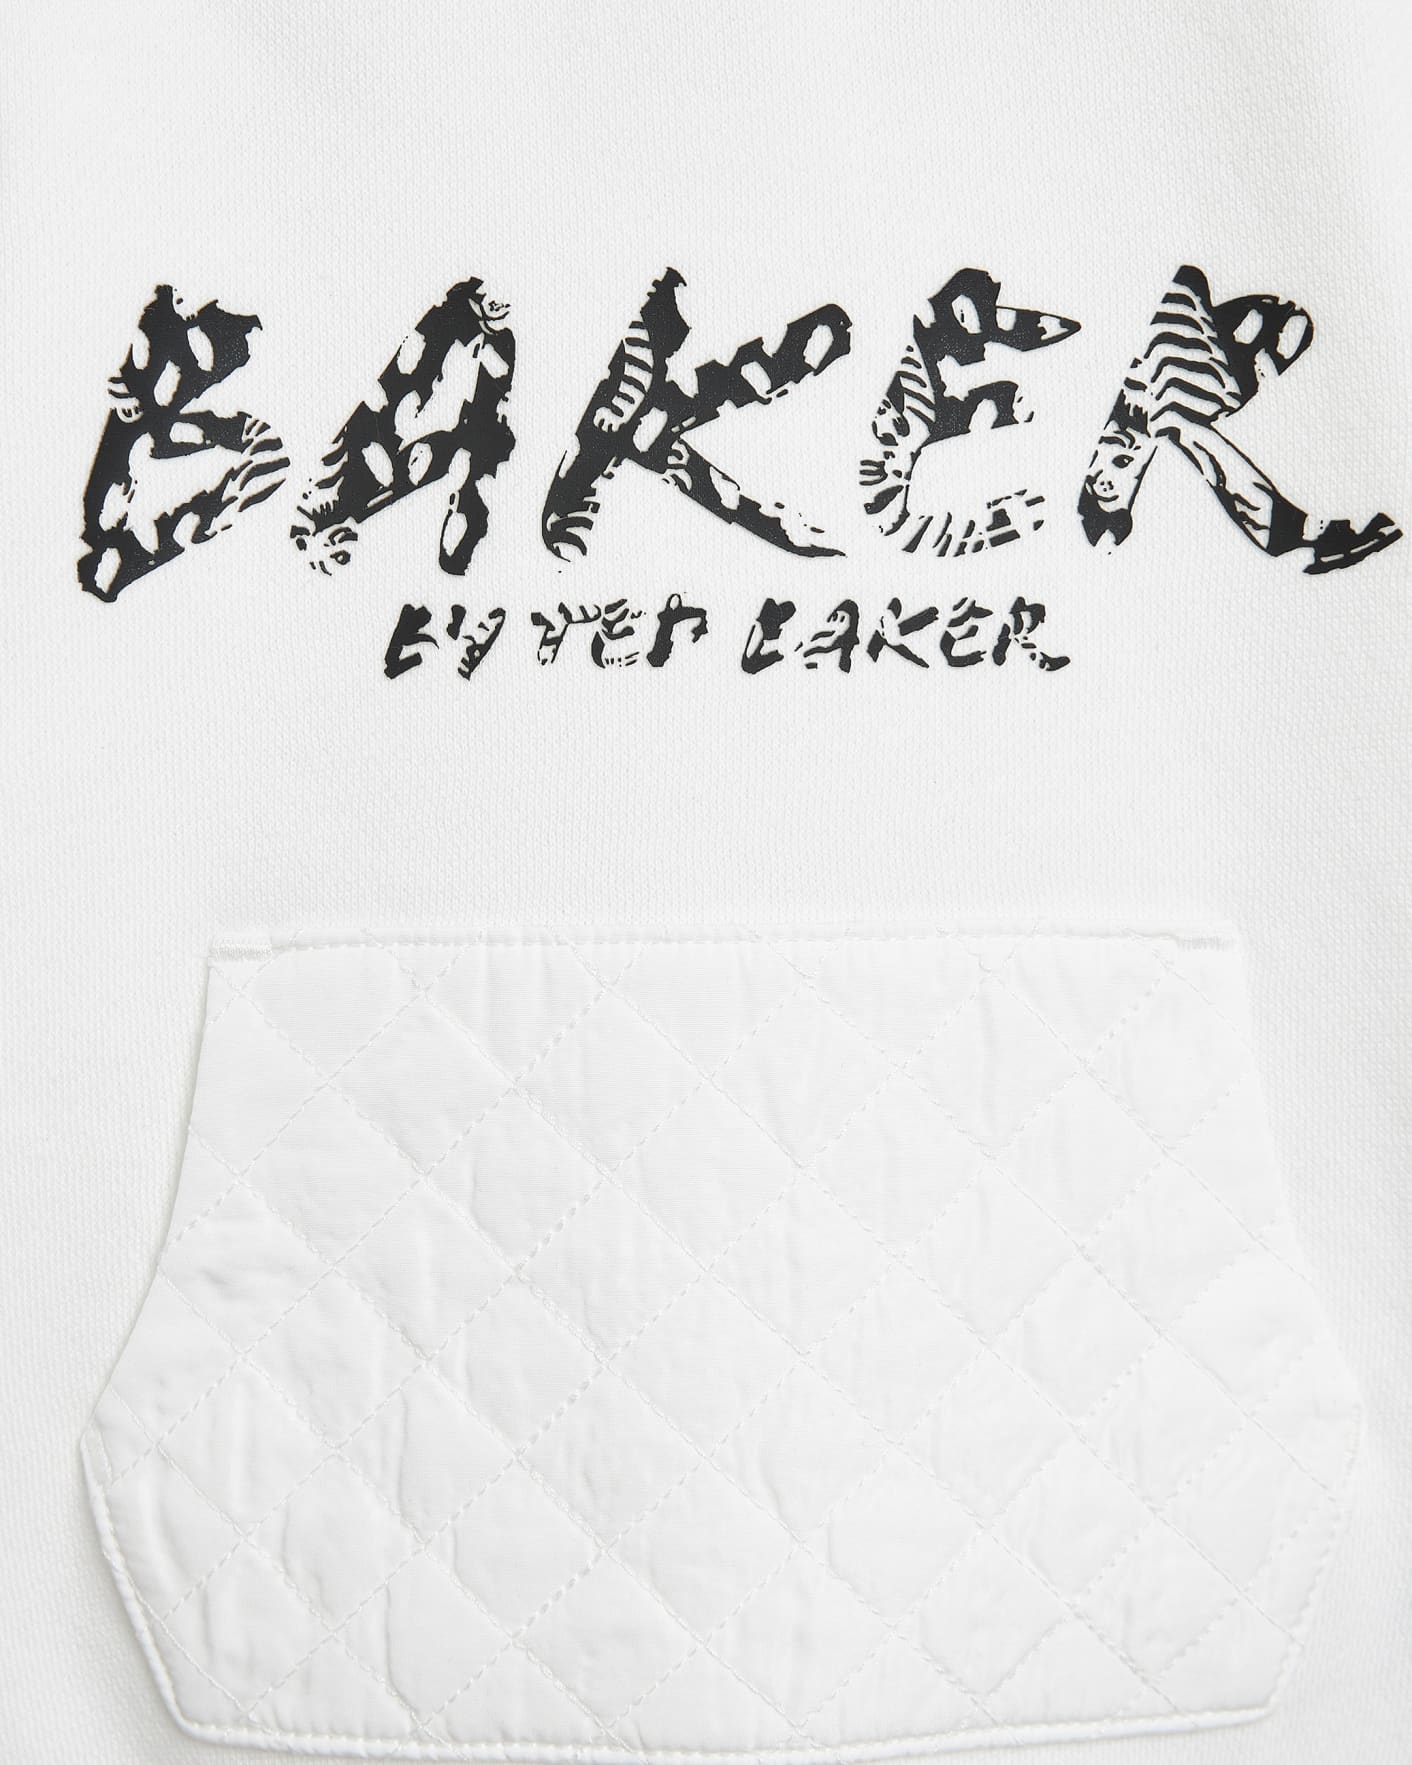 White Sweat top and tiger printed legging set Ted Baker